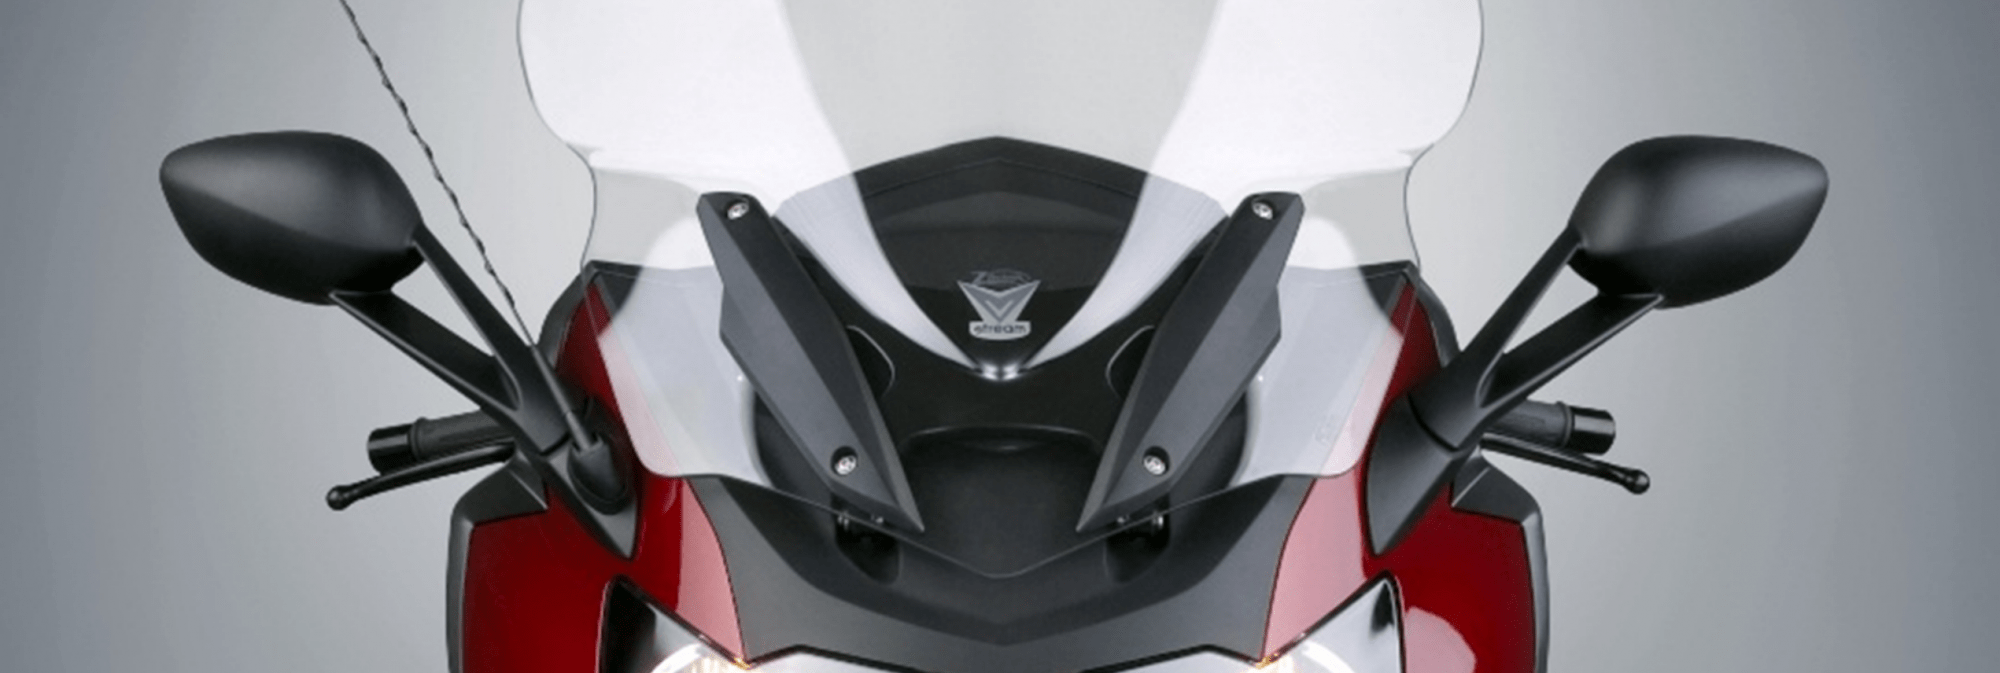 Motorcycle front glazing